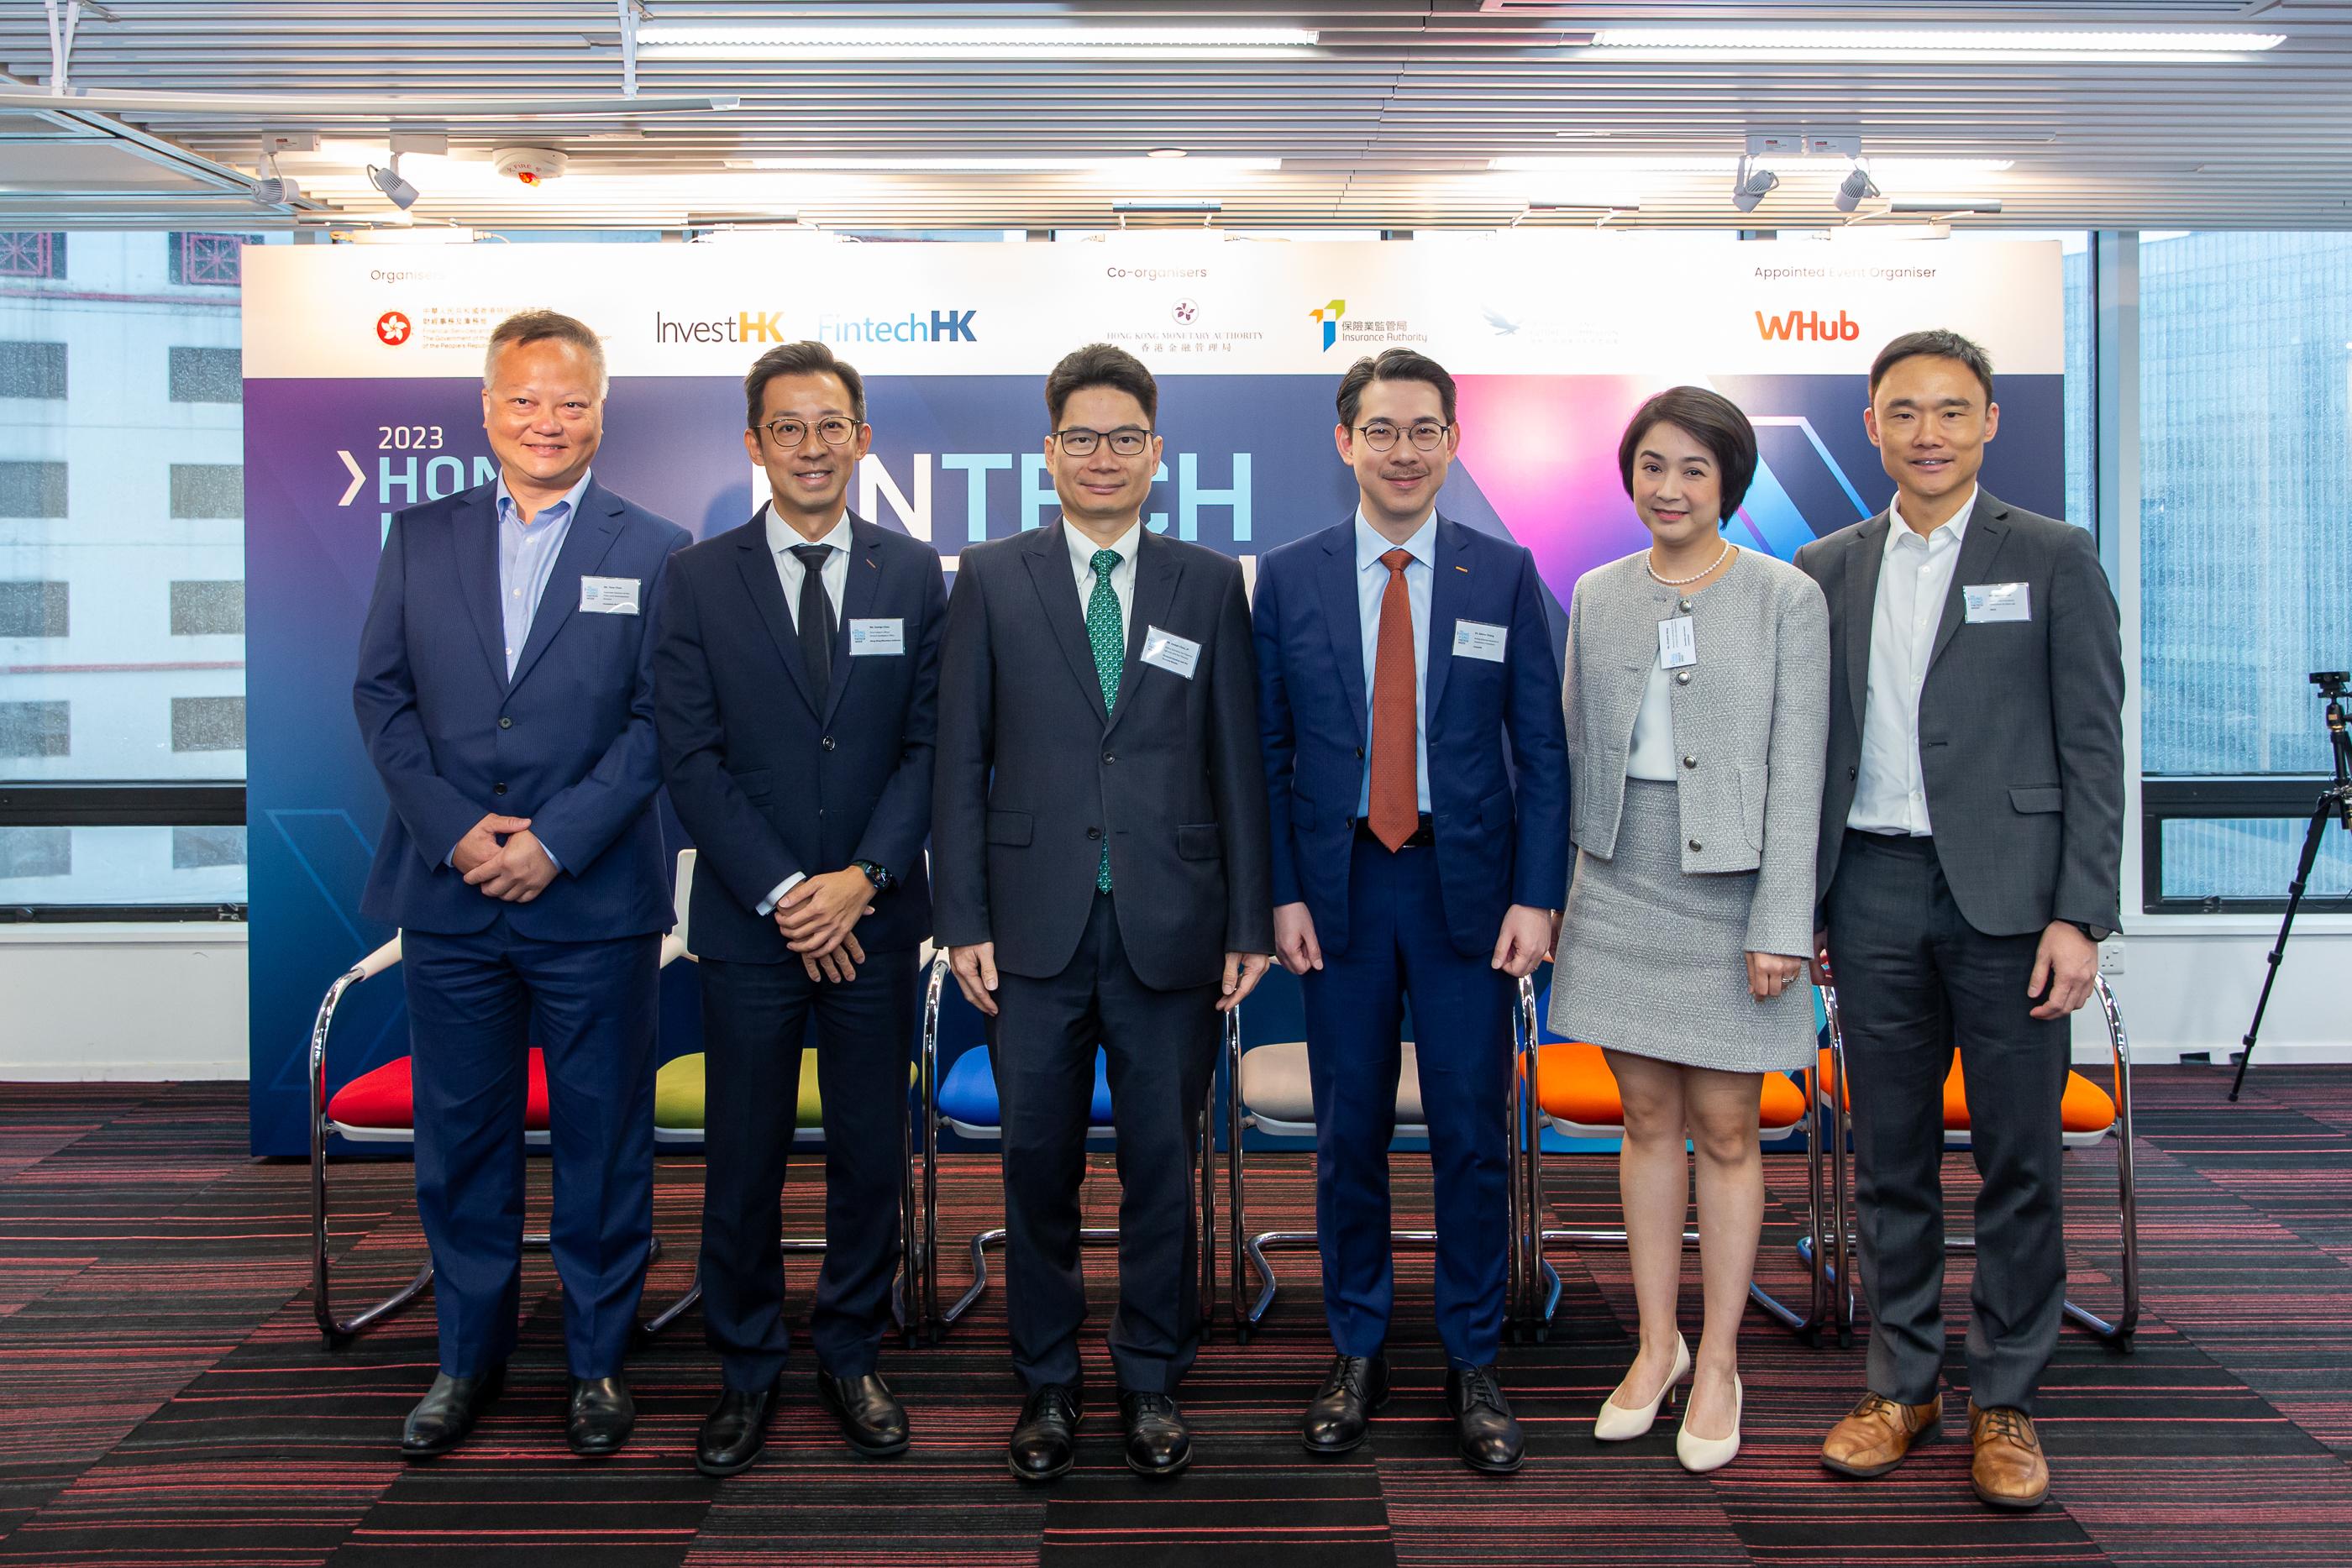 Invest Hong Kong (InvestHK) today (October 18) announced details of Hong Kong FinTech Week 2023. Photo shows (from left) the Associate Director of the Policy and Development Division of the Insurance Authority, Mr Tony Chan; the Chief Fintech Officer, Fintech Facilitation Office of the Hong Kong Monetary Authority, Mr George Chou; the Acting Secretary for Financial Services and the Treasury, Mr Joseph Chan; the Acting Director-General of Investment Promotion of InvestHK, Dr Jimmy Chiang; the Director of Licensing and Head of Fintech Unit, Intermediaries, of the Securities and Futures Commission, Ms Elizabeth Wong; and the Senior Vice President, Innovation & Data Lab of Hong Kong Exchanges and Clearing Limited, Mr Andrew Loh, at today's announcement event.

